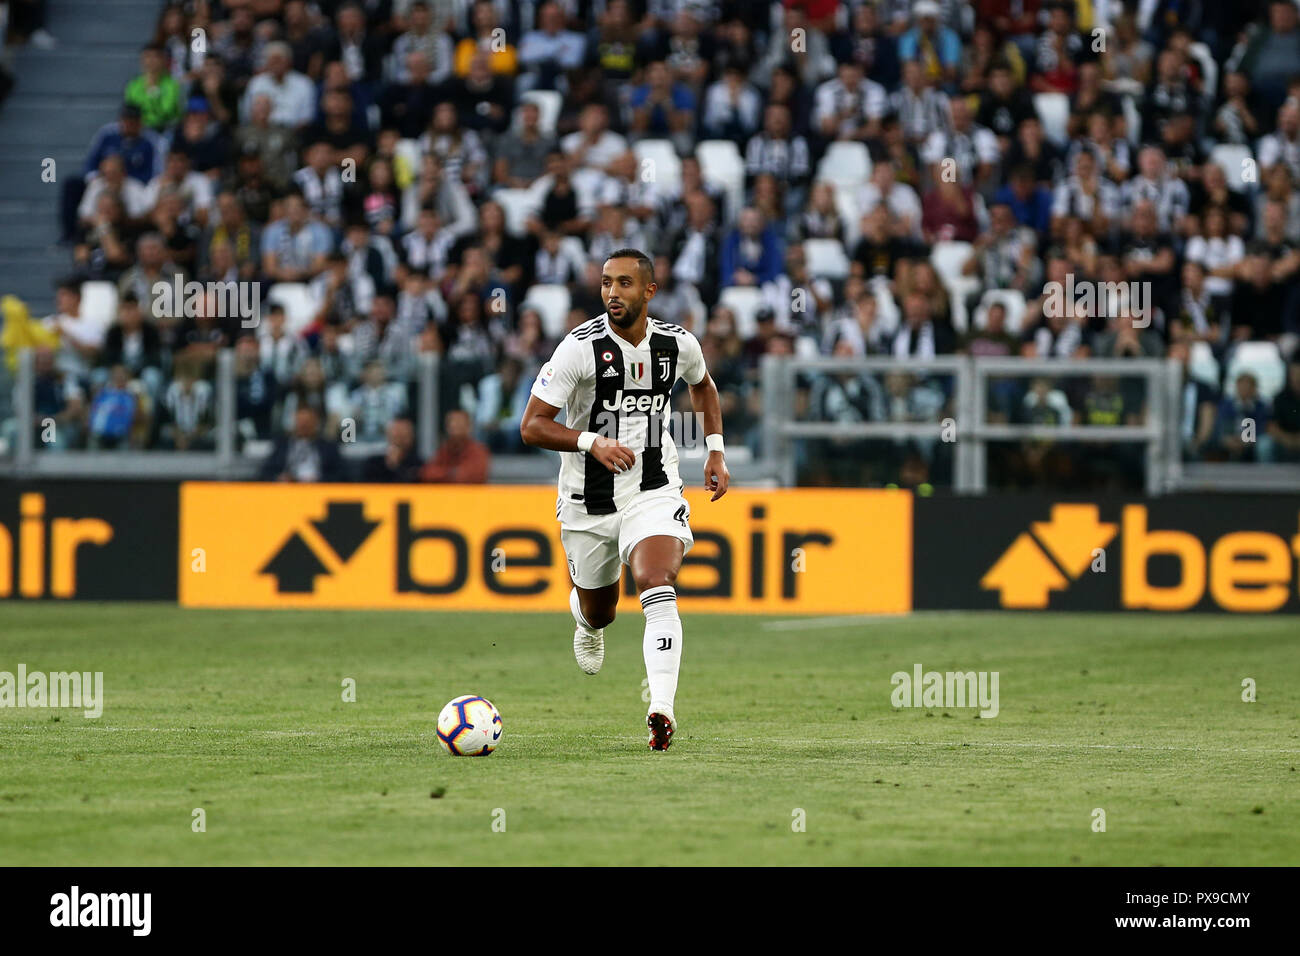 Torino, Italy. 20th October 2018. Medhi Benatia of Juventus FC in action during the Serie A football match between Juventus Fc and Genoa Cfc. Credit: Marco Canoniero/Alamy Live News Stock Photo